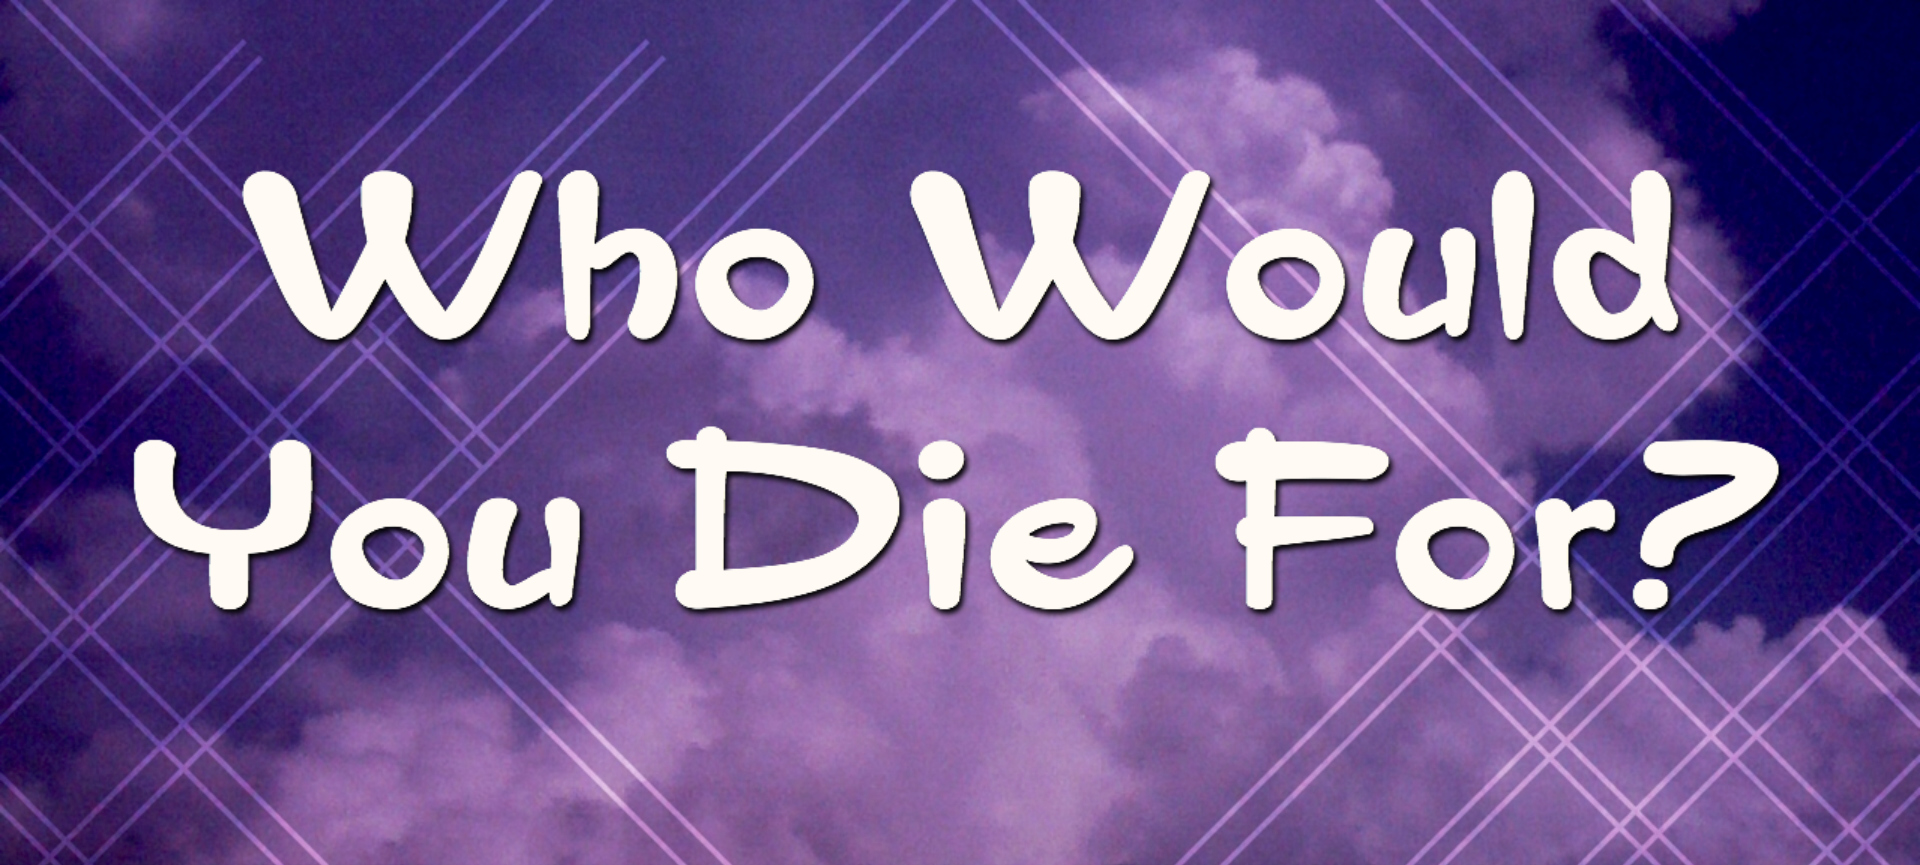 Who Wold You Die For?